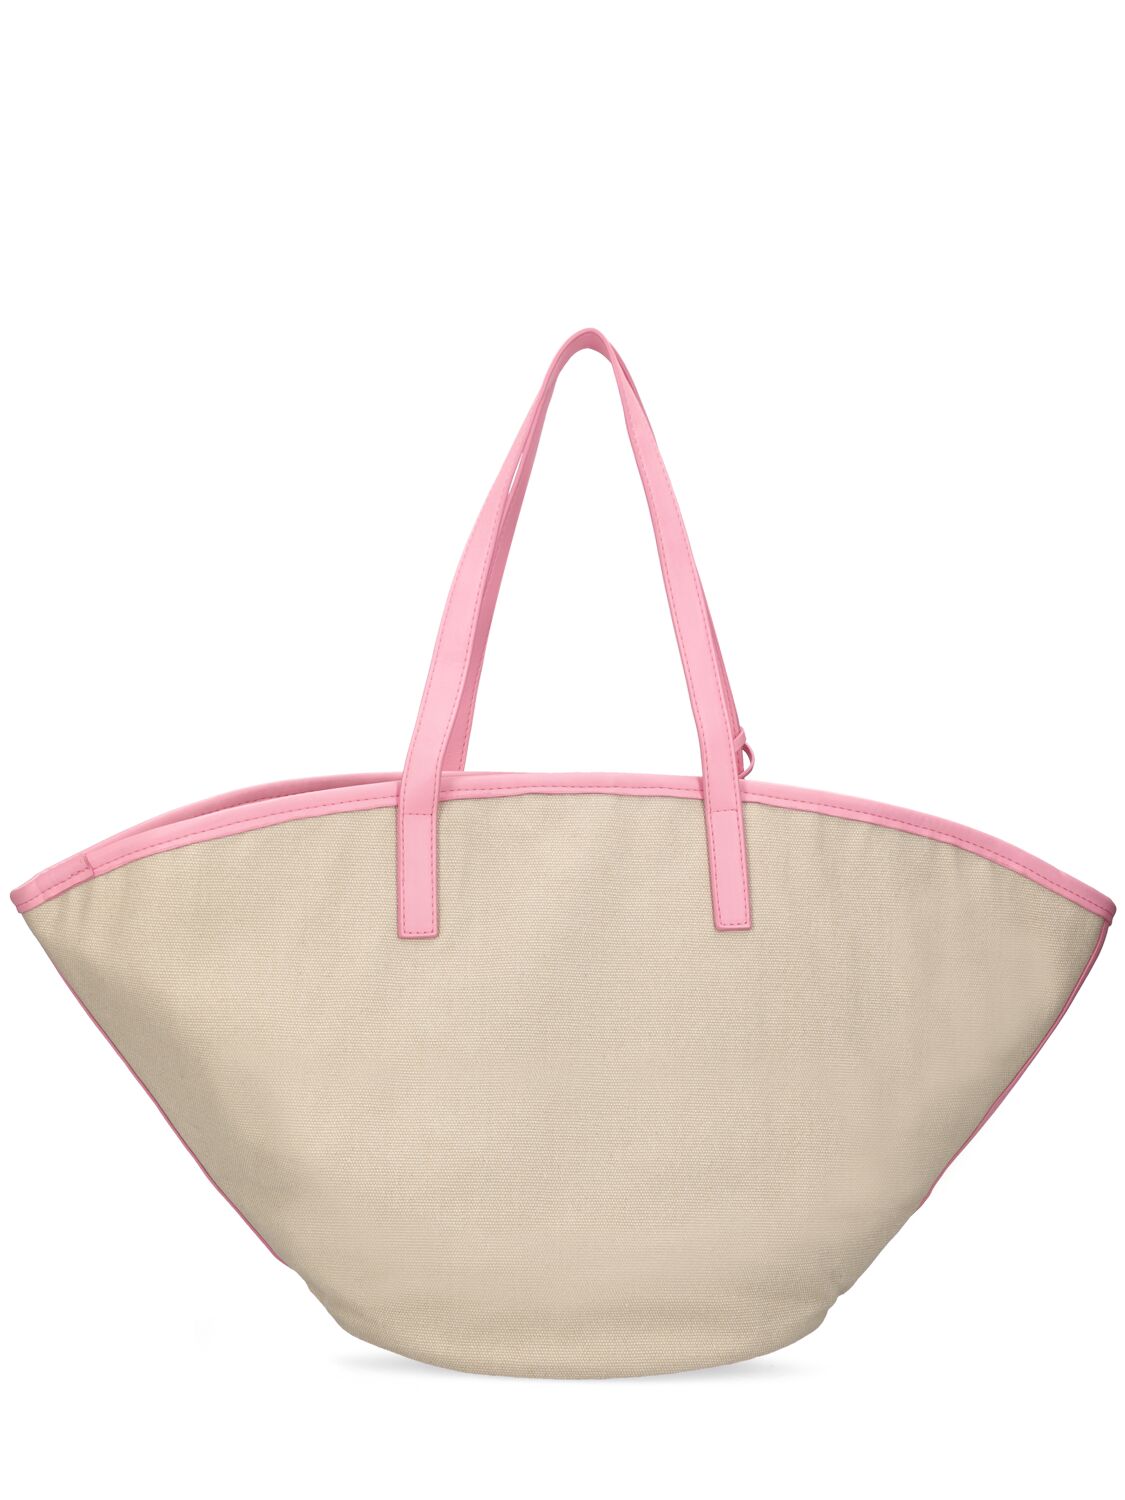 Shop Msgm Canvas Shopping Bag In Pink